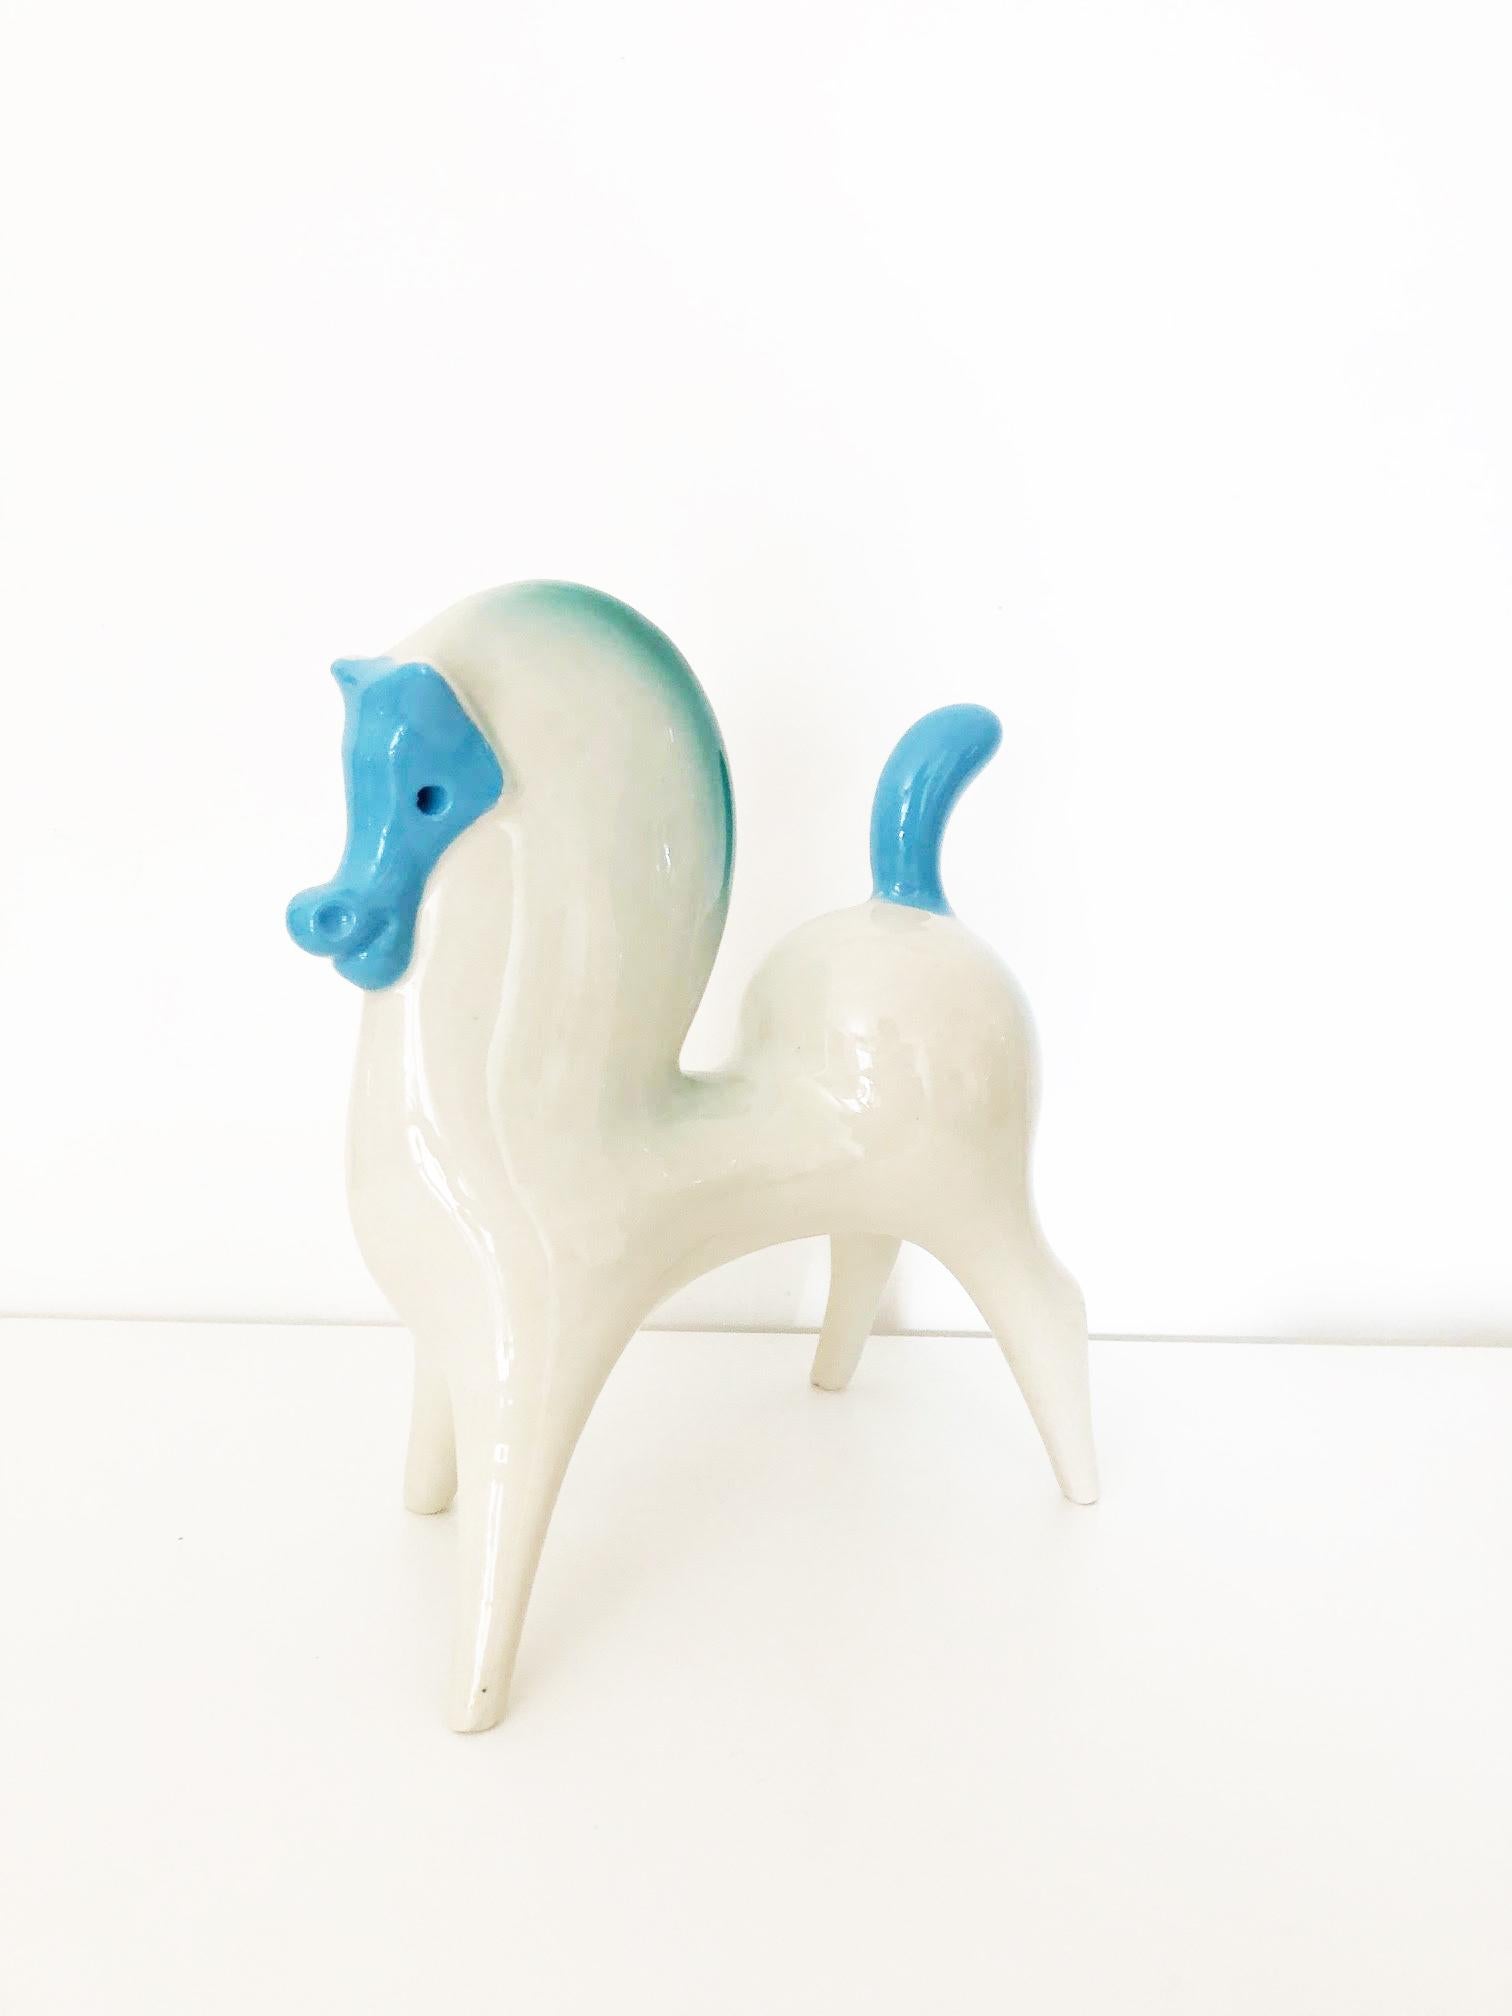 Horse of Roberto Rigon Made in Italy - Art -

Year: 1950s

Materials: Signed and glazed ceramic, Green

Conditions: Perfect

Measurements: Cm 30 x cm 20.

